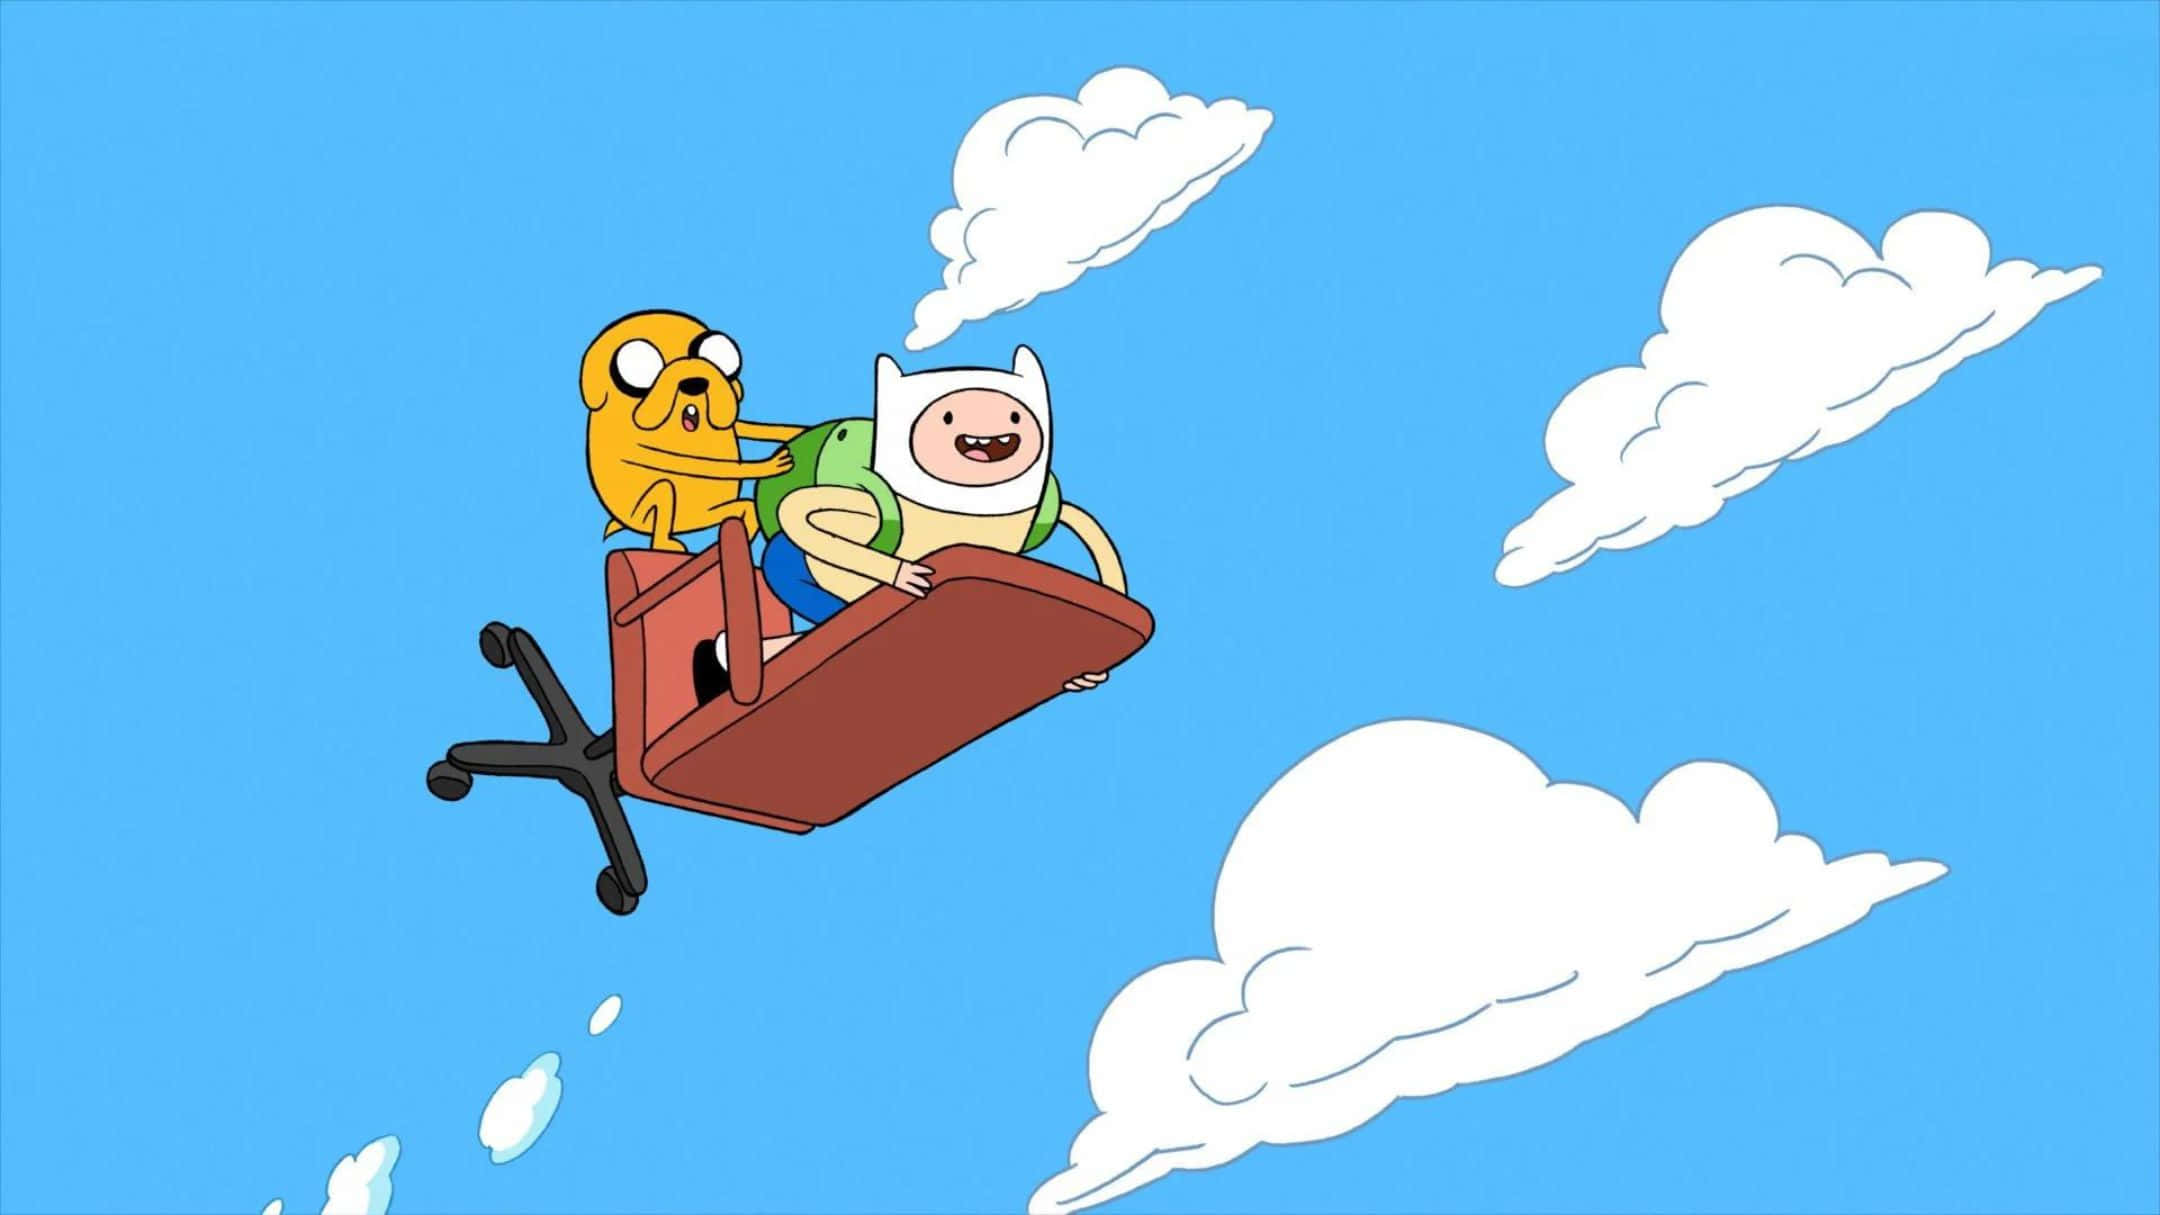 “Explore the world of Adventure Time with Finn and Jake”